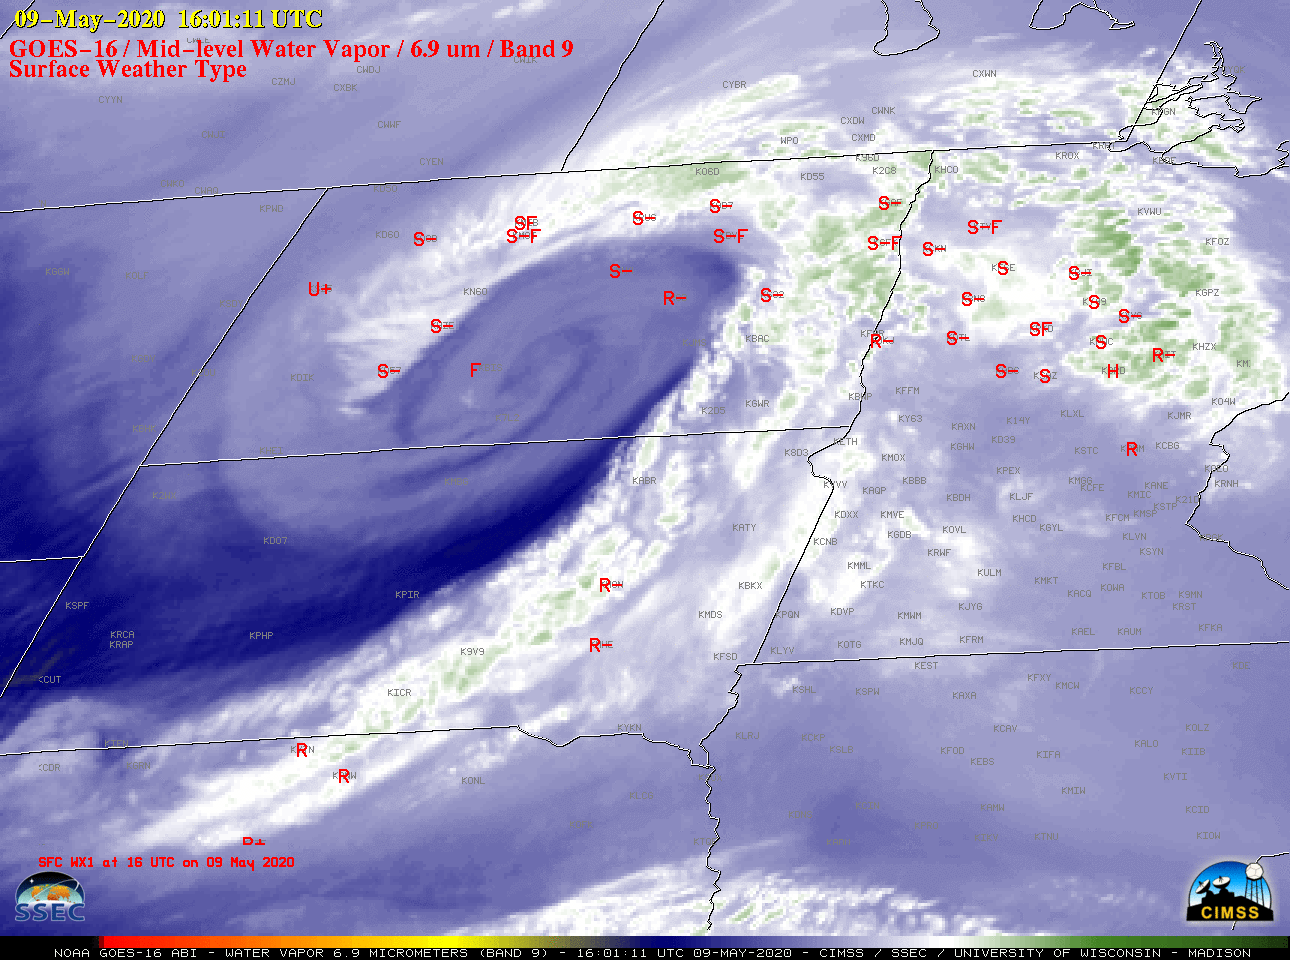 GOES-16 Mid-level Water Vapor (6.9 µm) images, with hourly surface weather type plotted in red (R=rain; S=snow; F=fog) [click to pay animation | MP4]